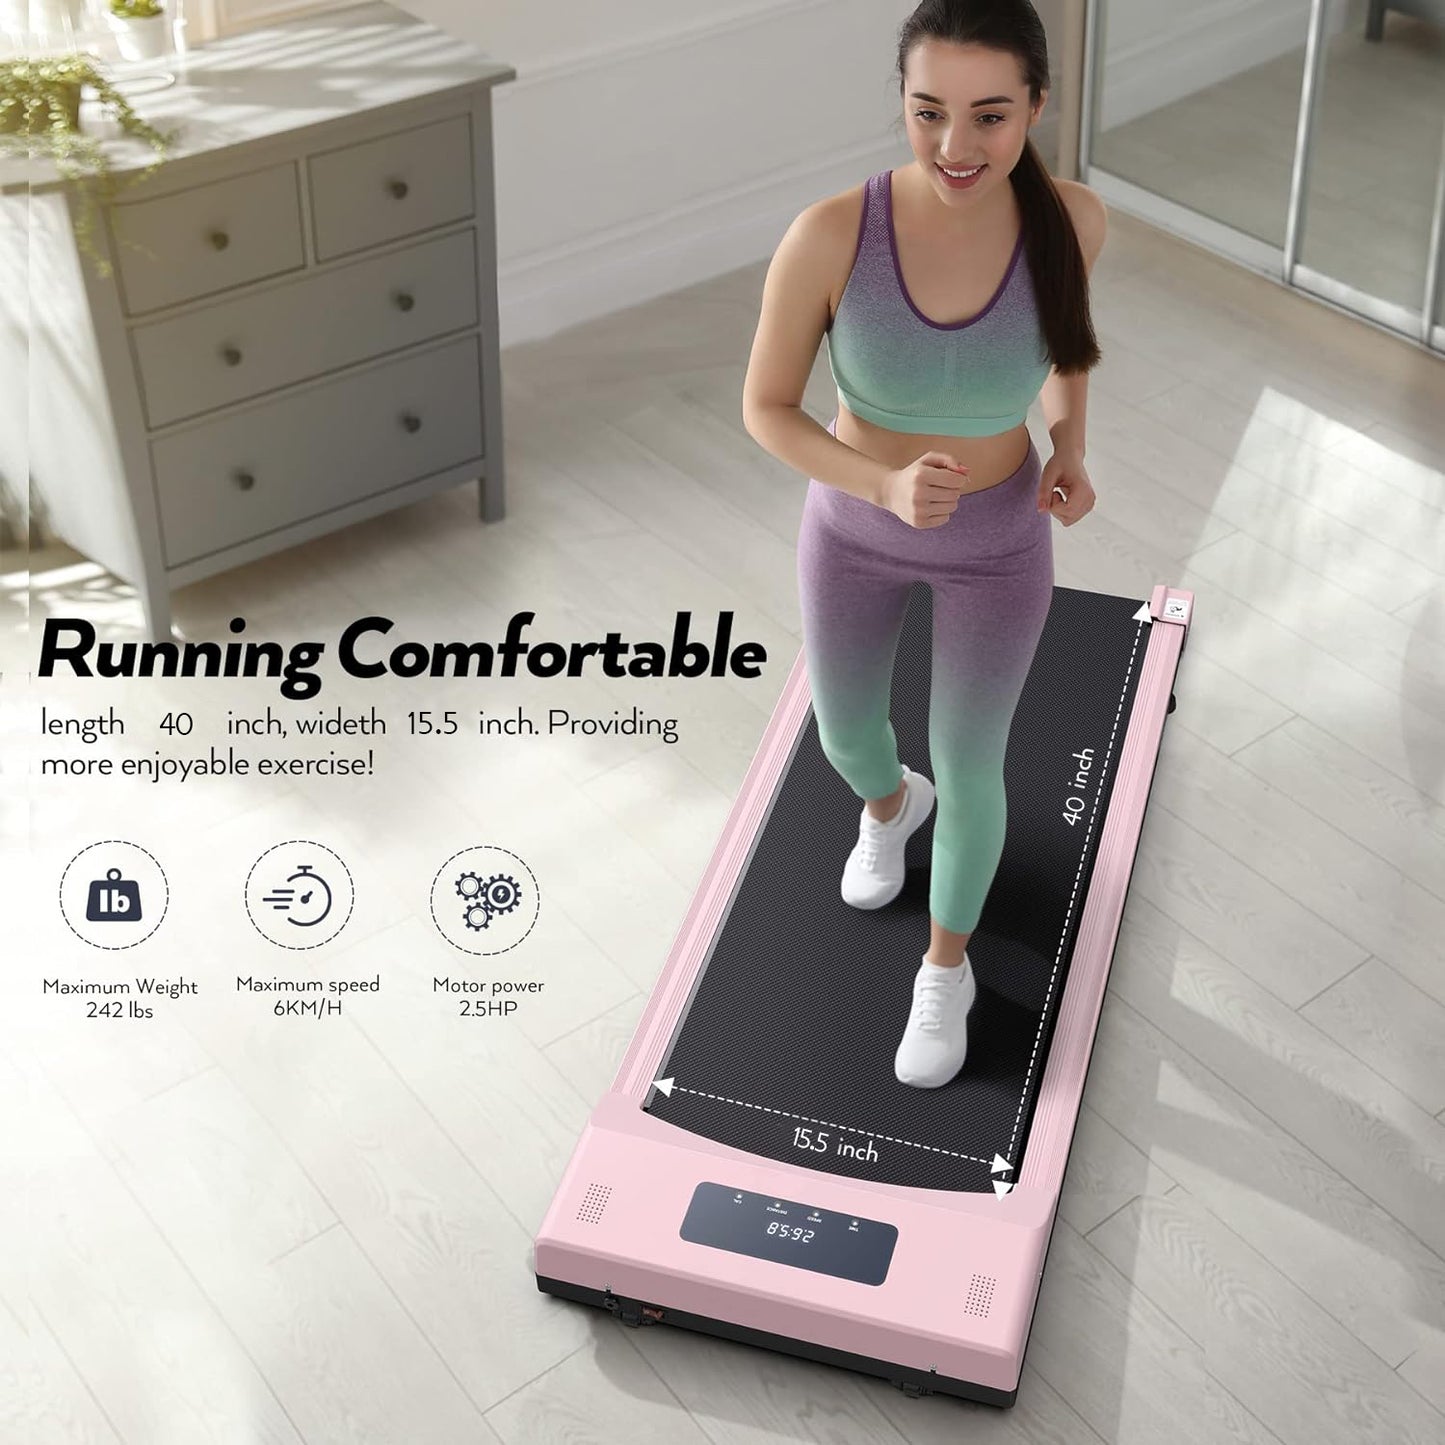 COOLBABY PBJB01 Compact and Powerful Under Desk Treadmill | Wireless Remote Control | LED Display | Ideal for Home and Office Use